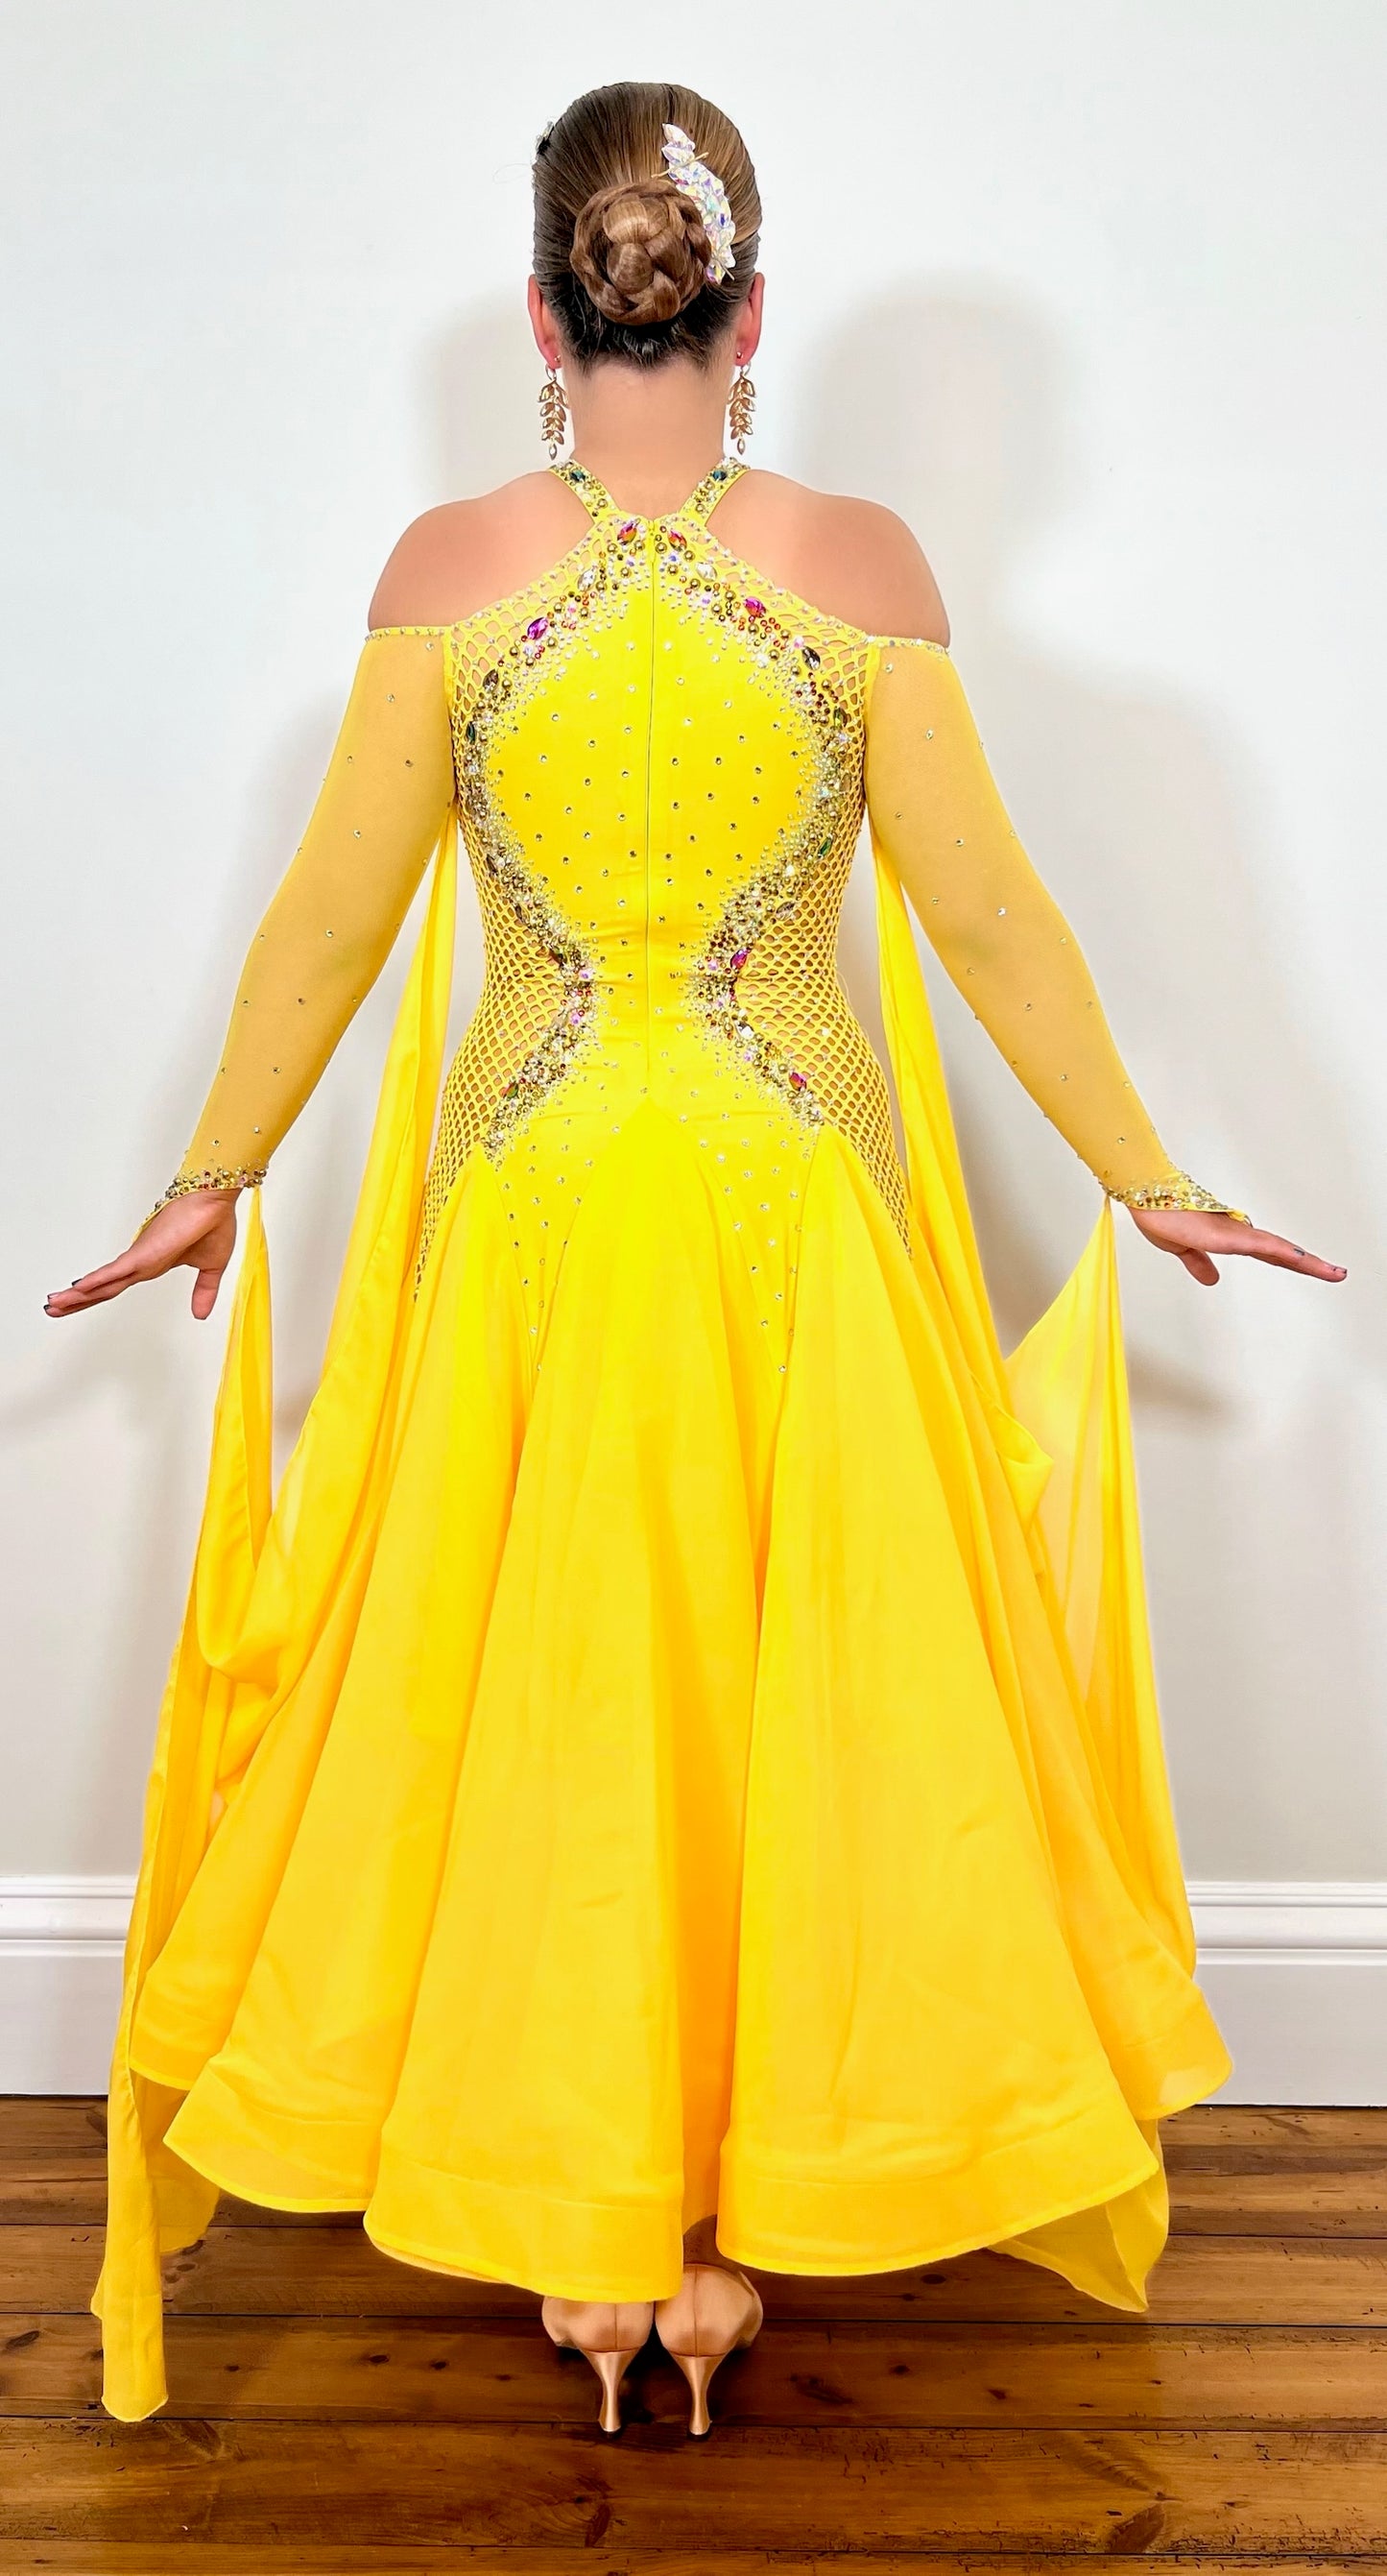 223 Yellow Fishnet Panel Dress halter neck style Ballroom Dress. Cold shoulder sleeves with high back.